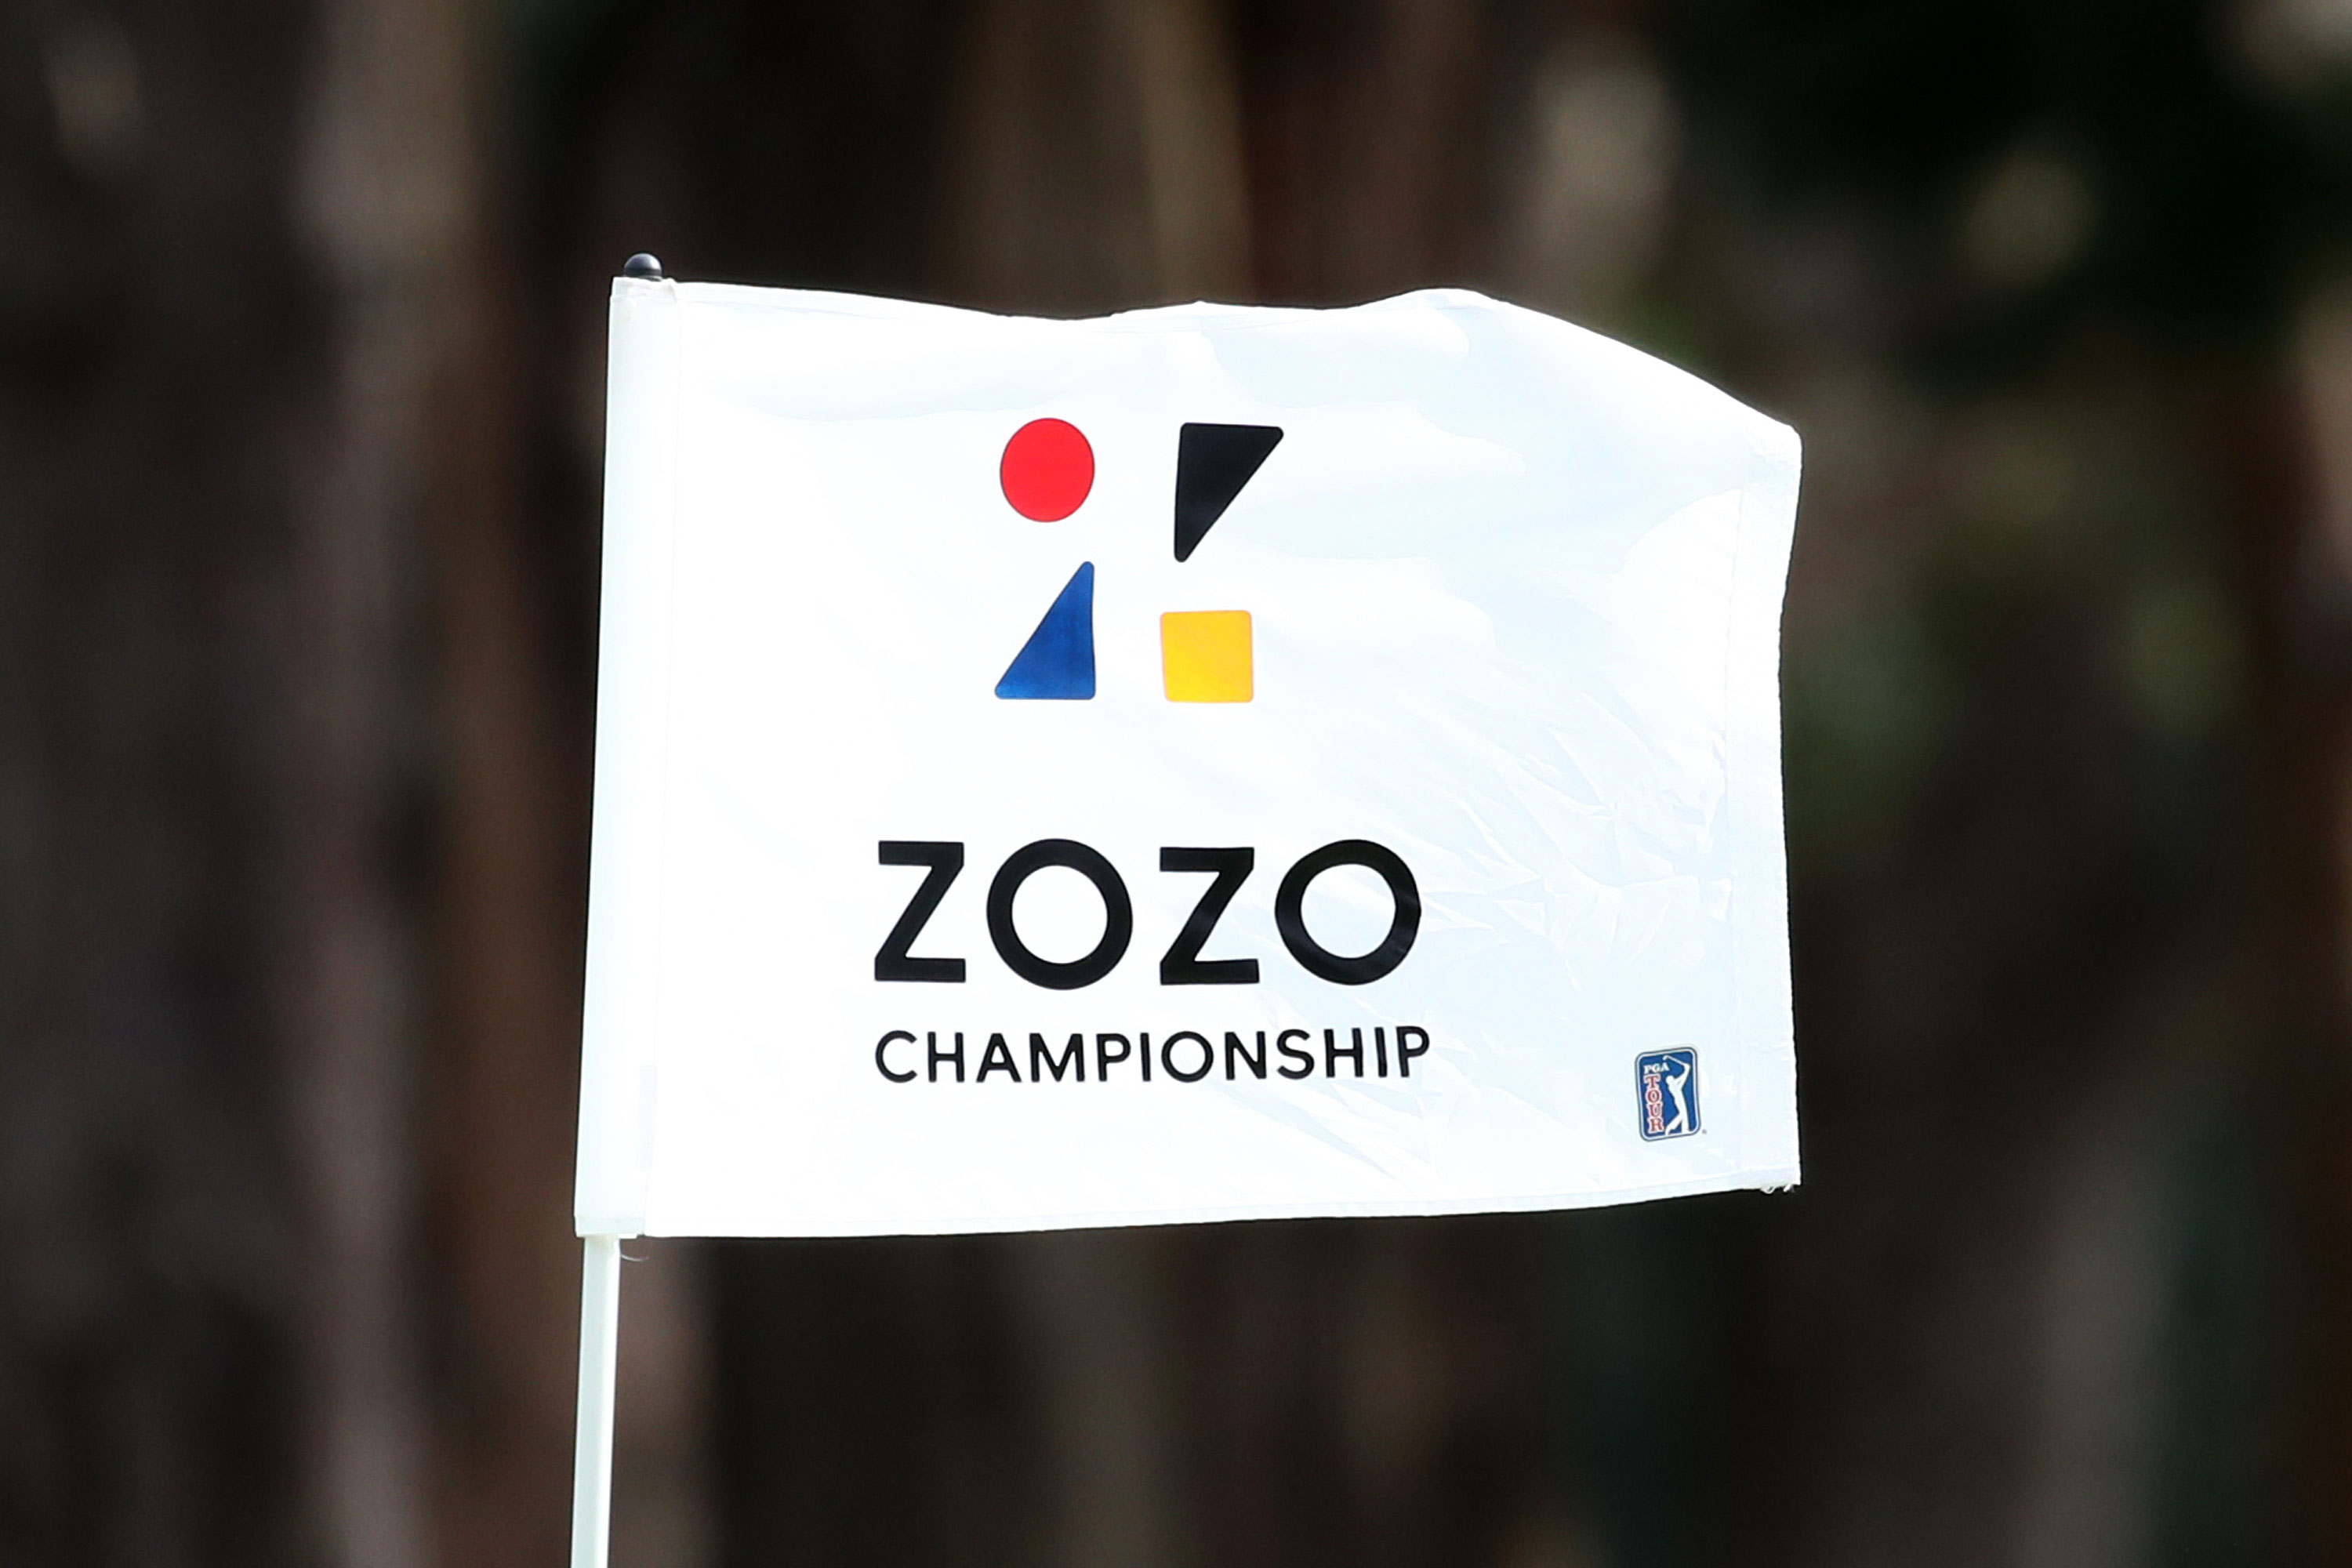 Here's the prize money payout for each golfer at the 2023 Zozo